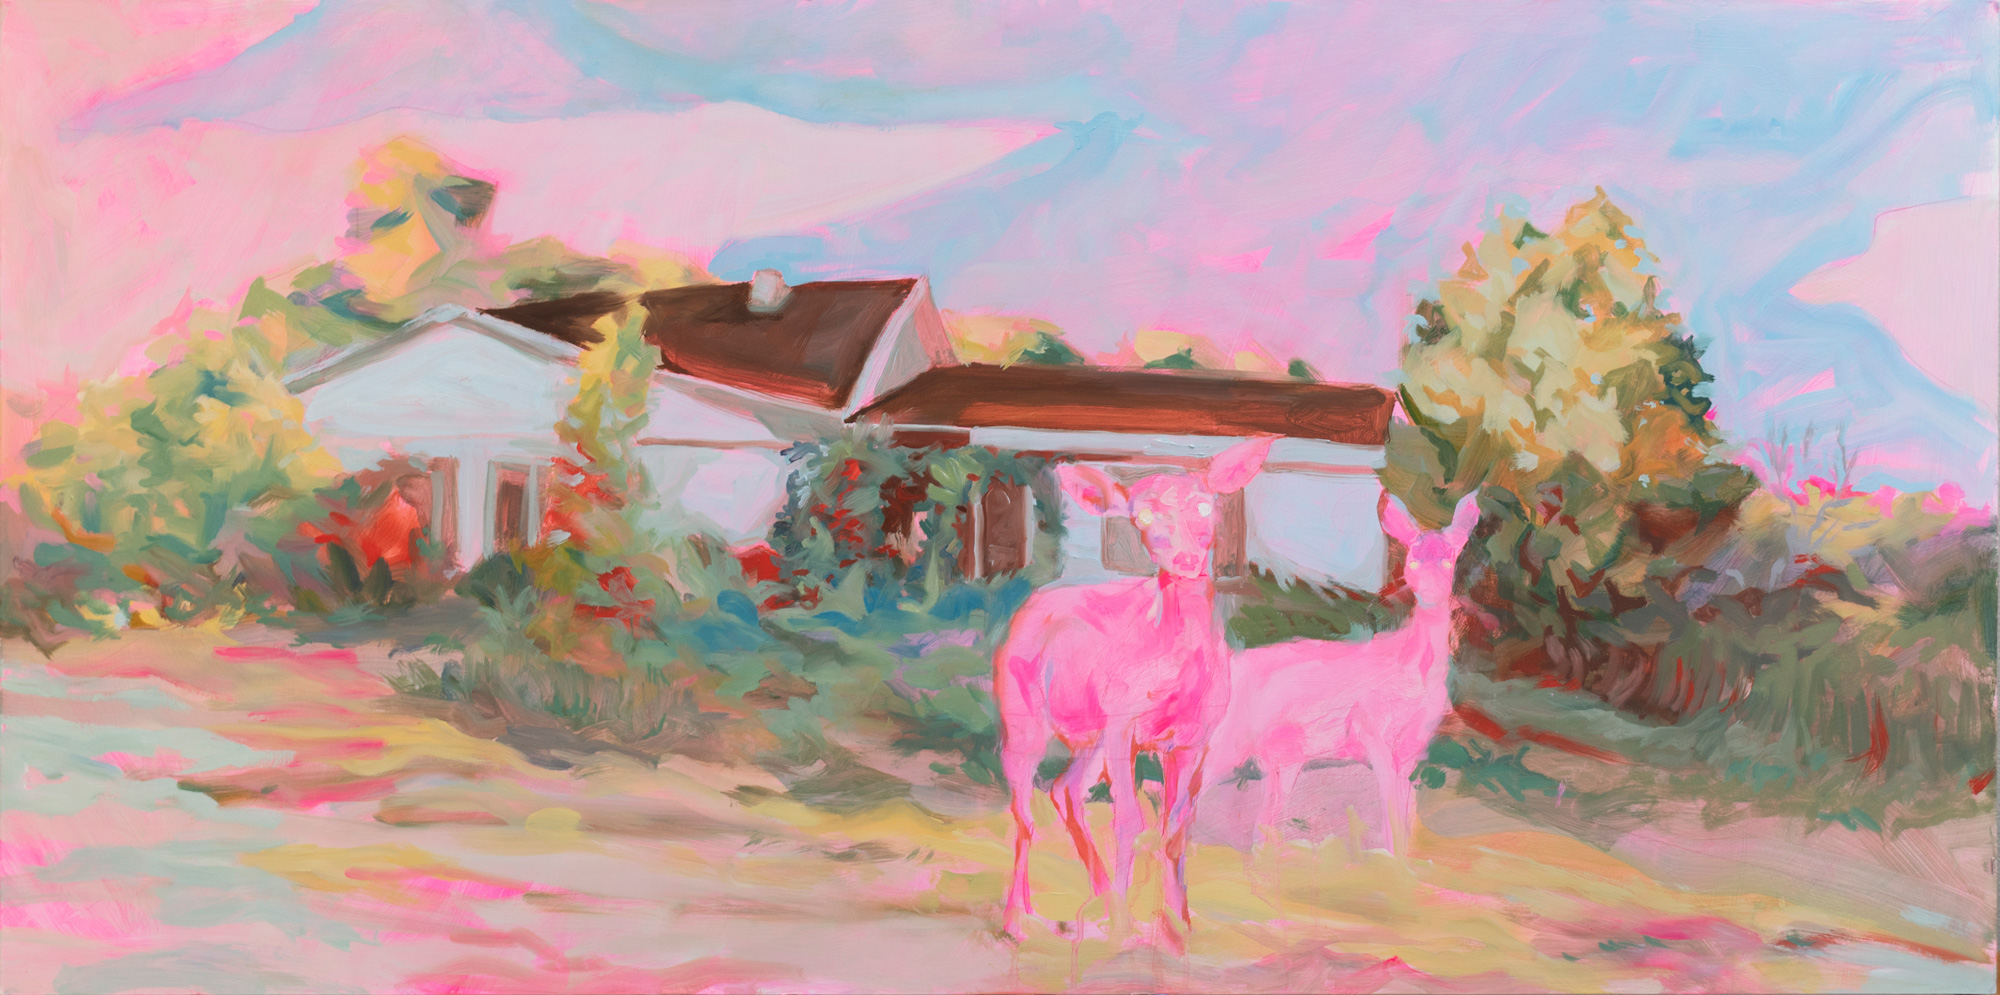 Painting of a pink deer in a field